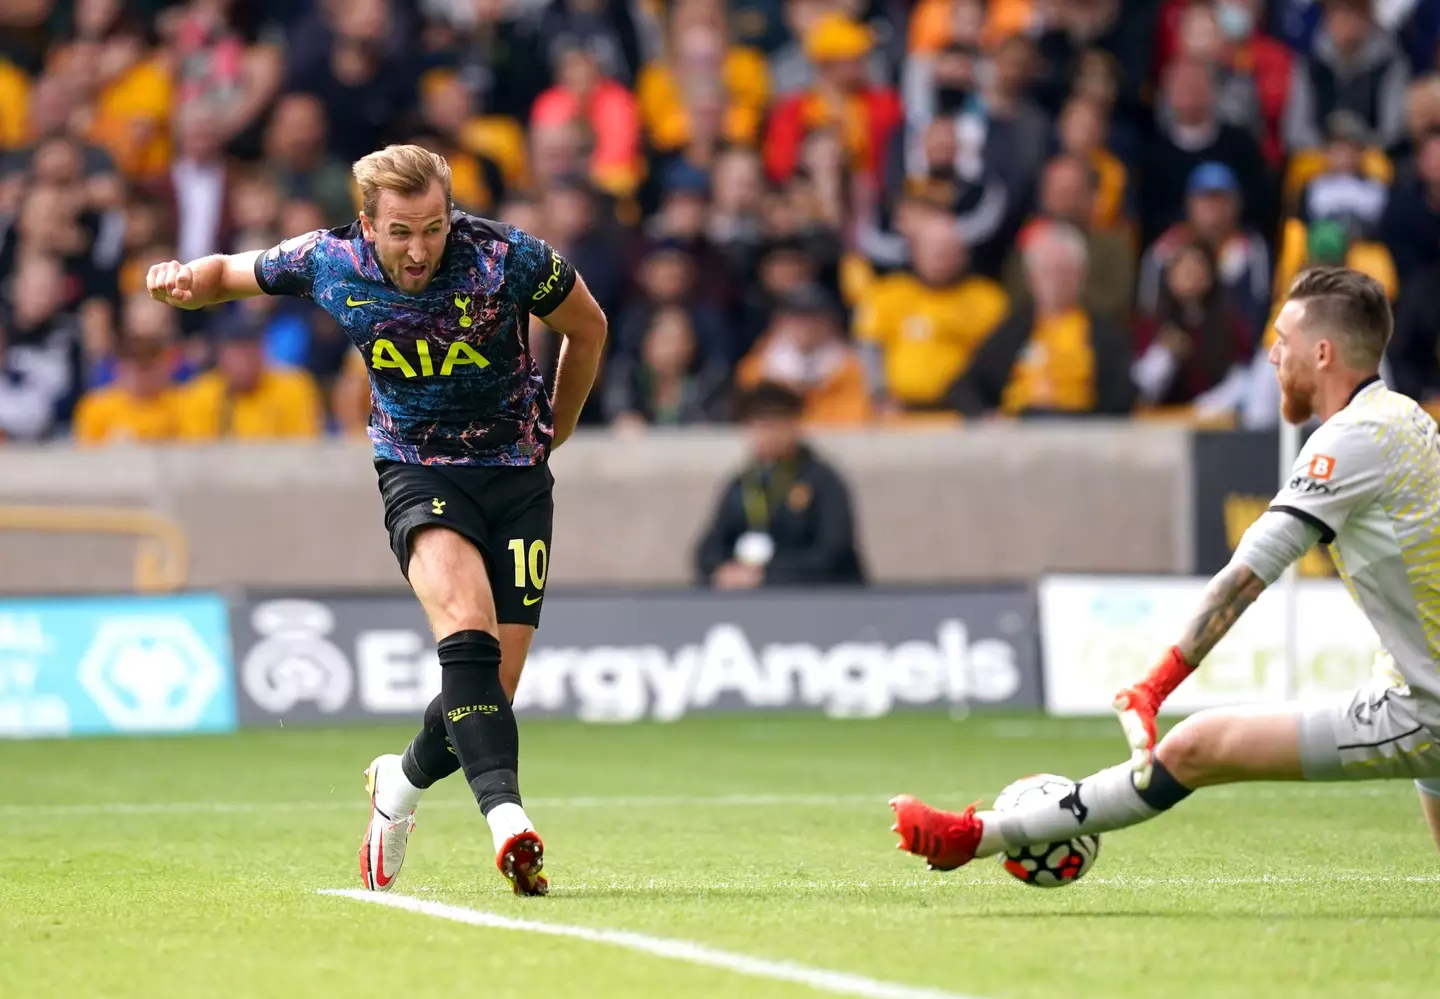 Tottenham Hotspur have been handed a big boost after Harry Kane committed his future to the club this week